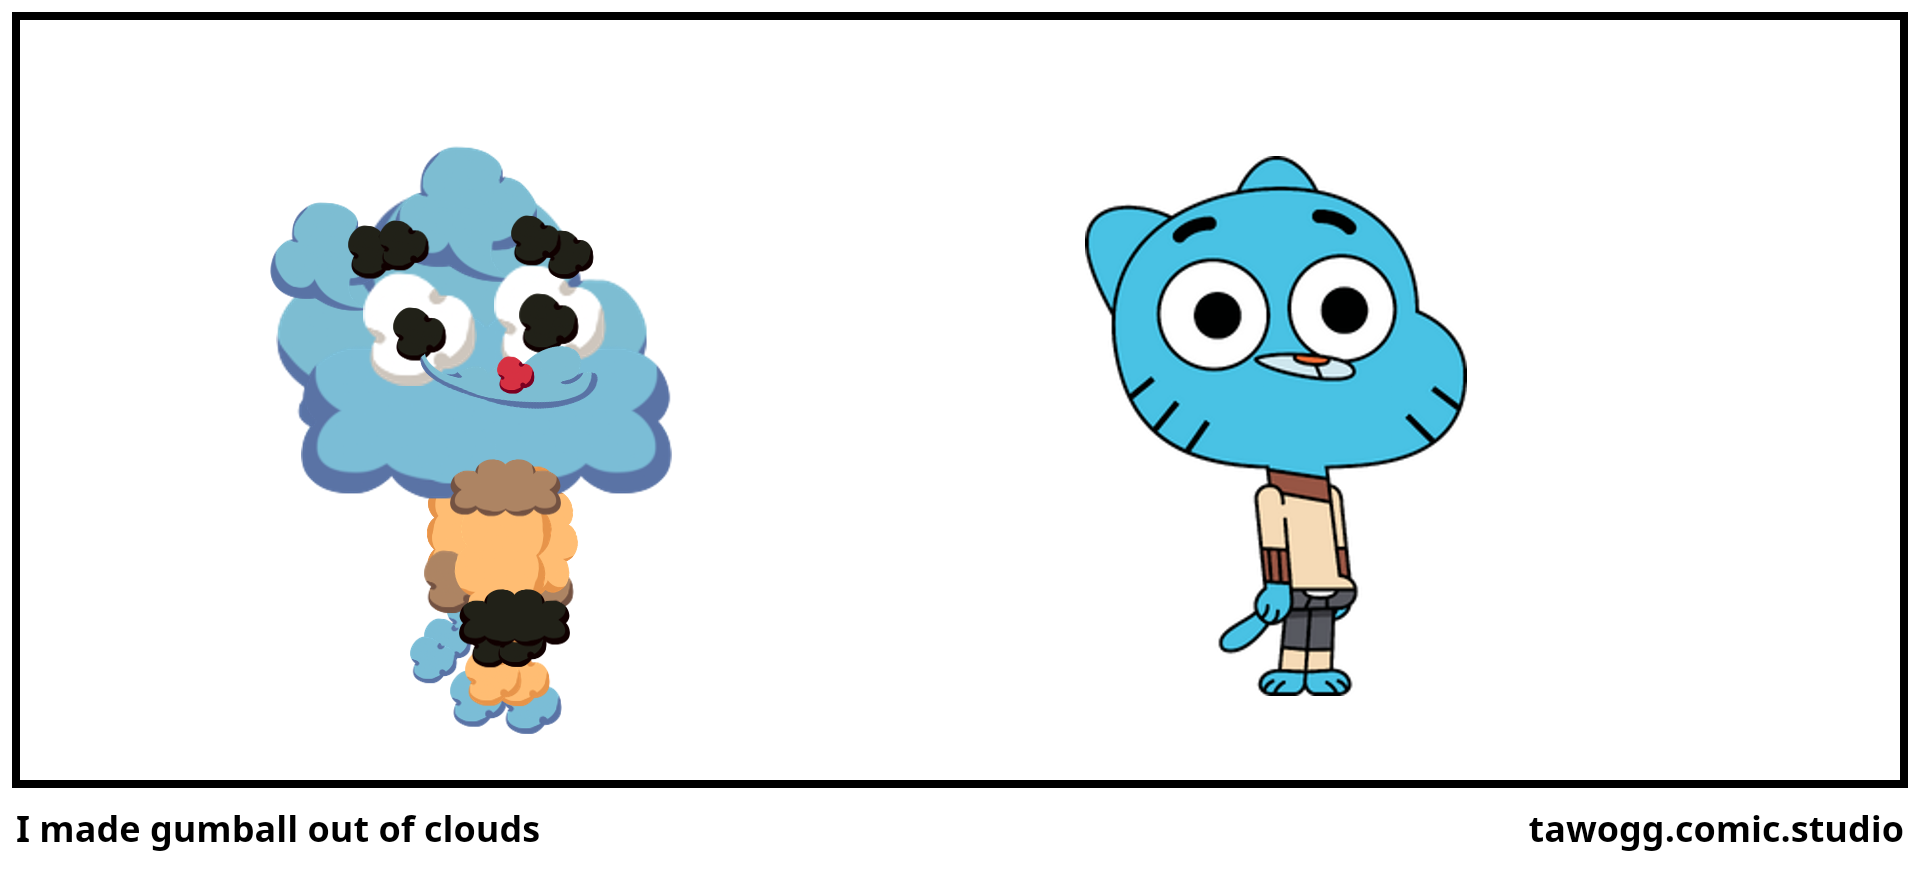 I made gumball out of clouds